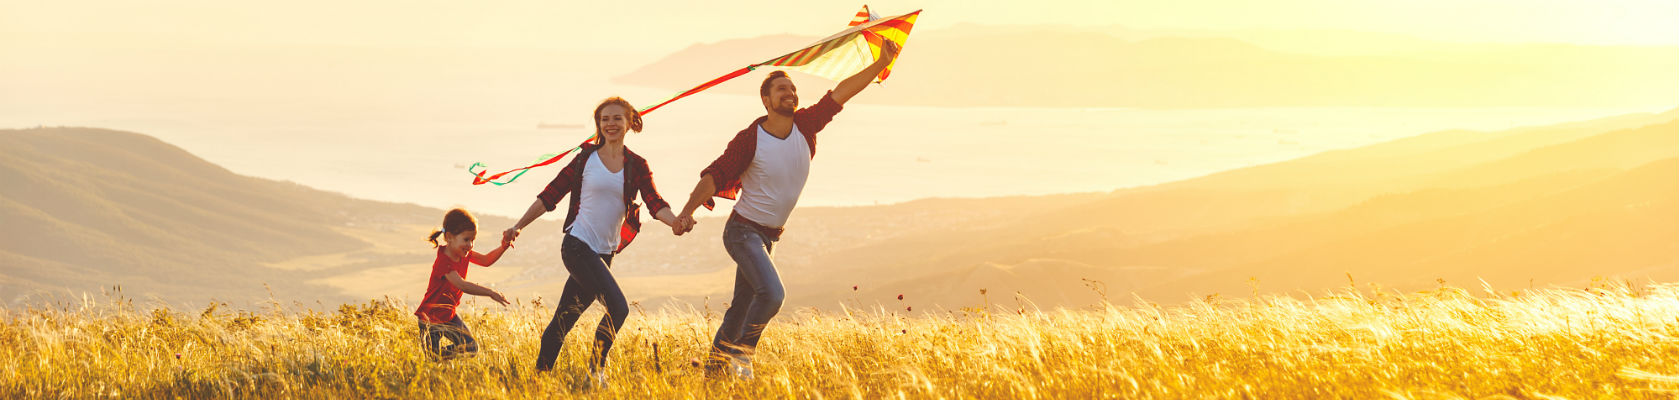 How we work - Brainstorm Health - Family flying kite in open fields with hills and ocean in background